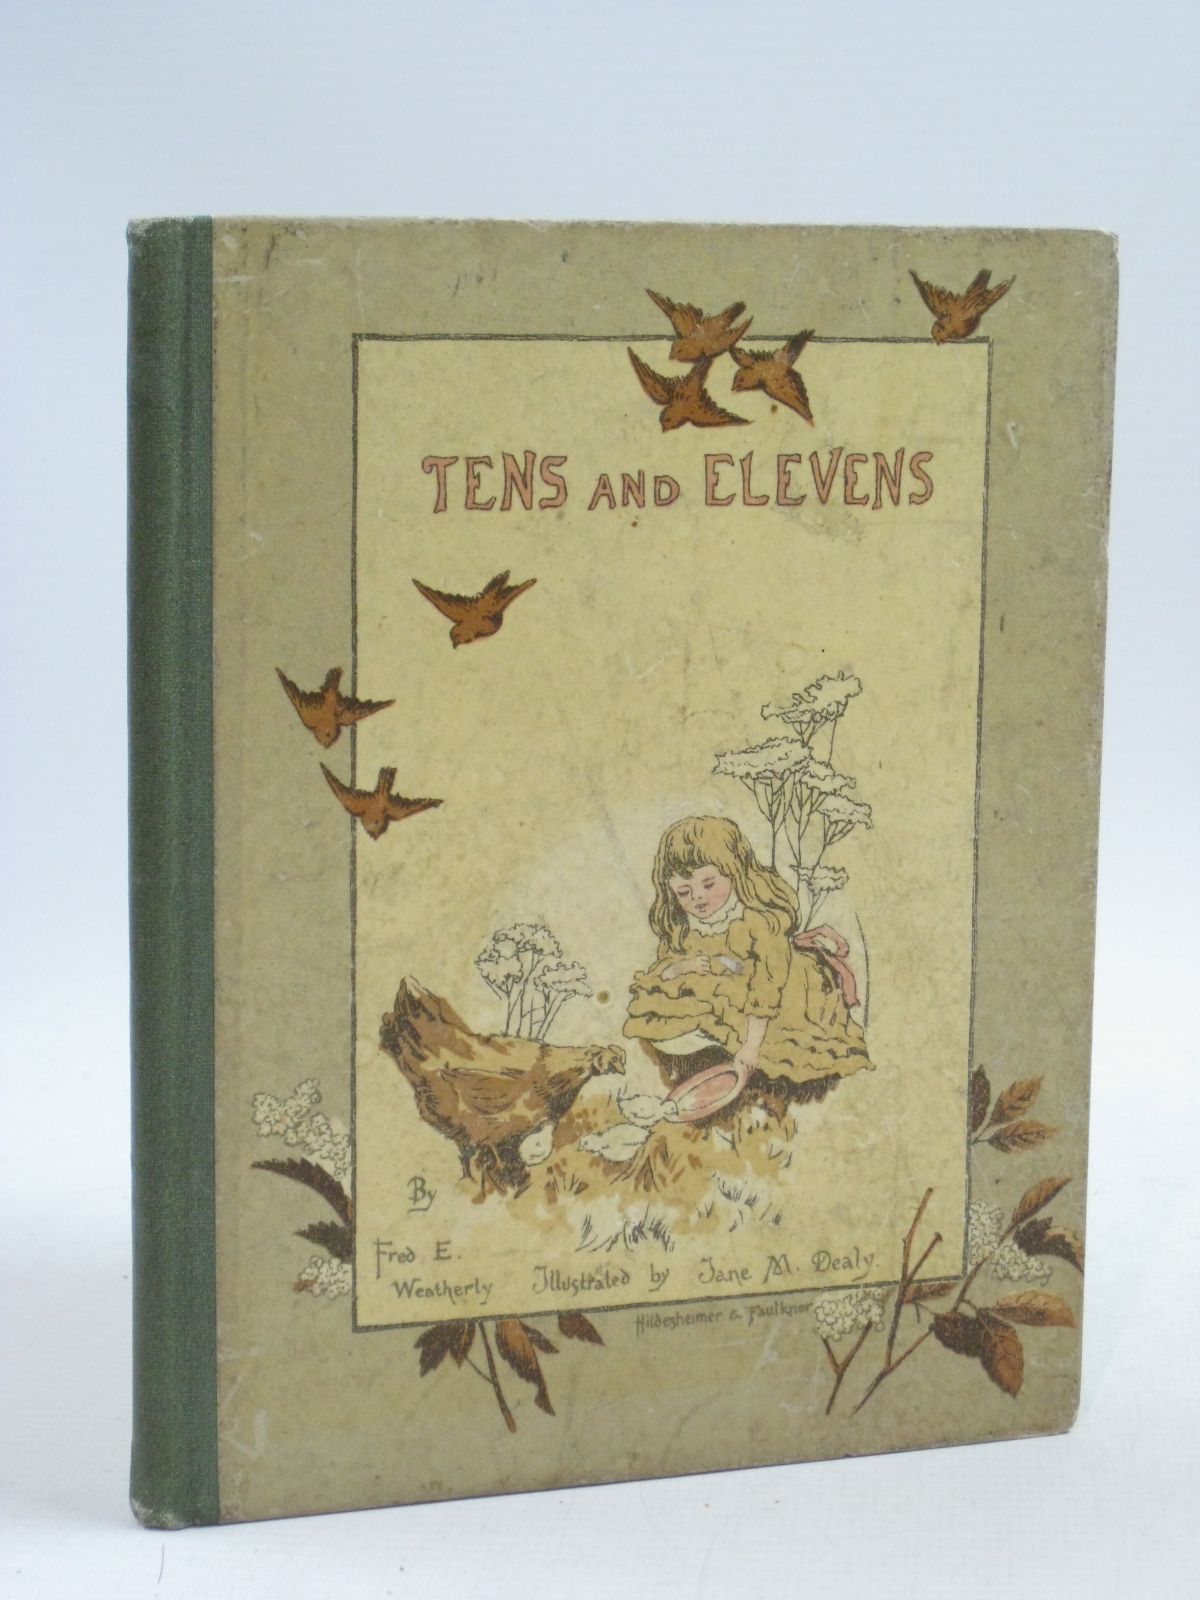 Cover of TENS AND ELEVENS by F.E. Weatherly